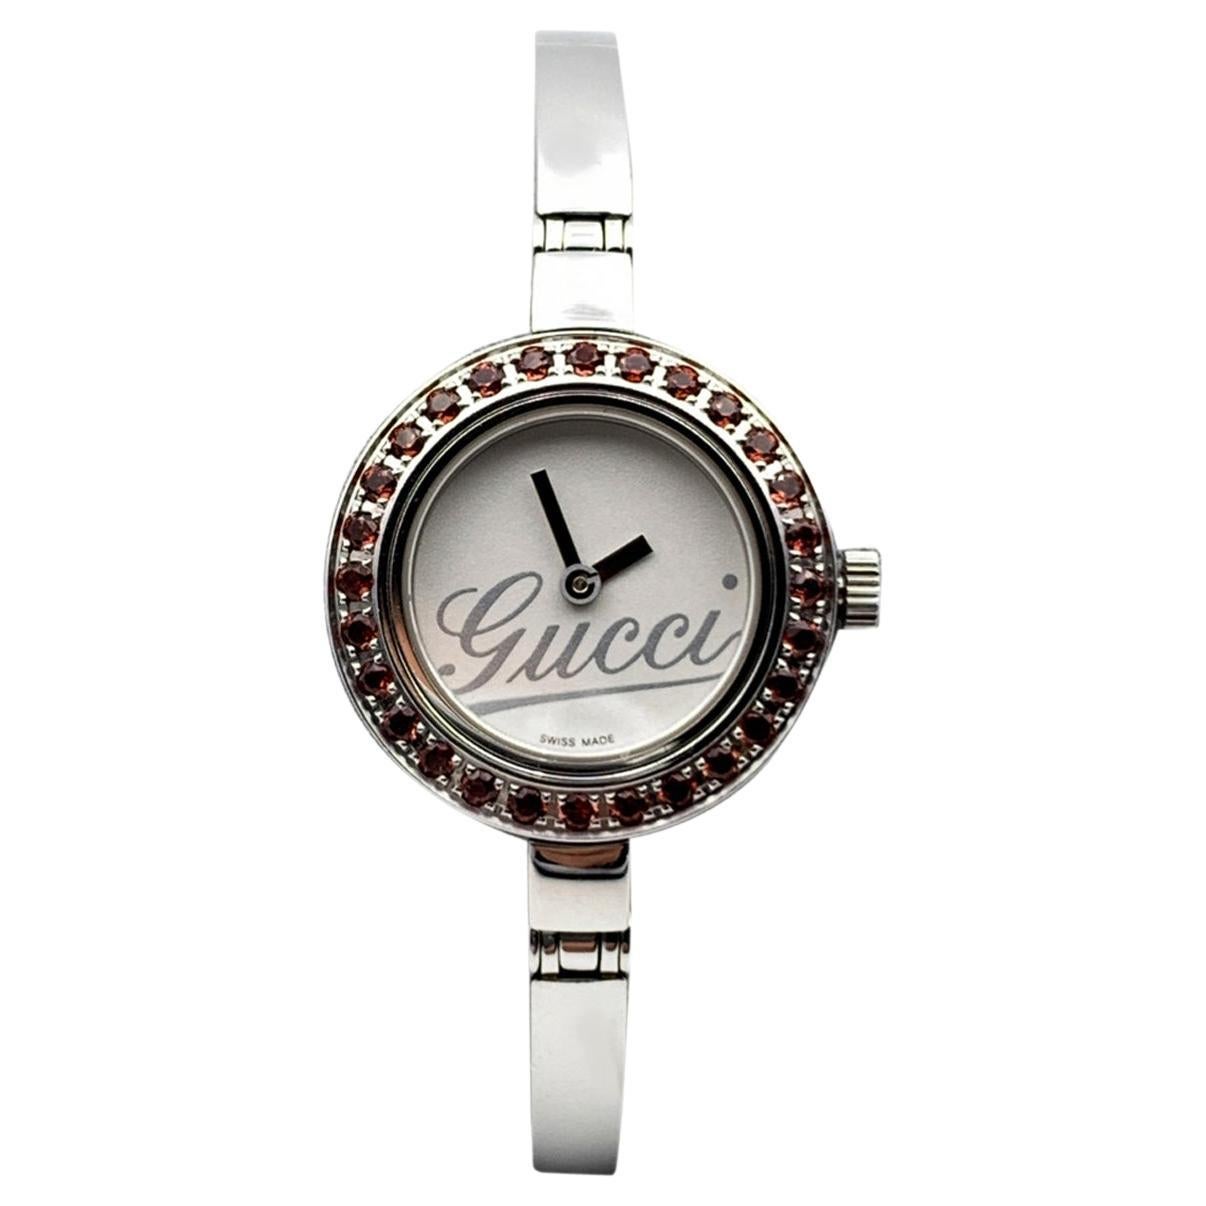 Gucci Vintage GUCCI 2700.2.l Ladies Women's Bangle Watch Wire... for  Rs.21,150 for sale from a Trusted Seller on Chrono24